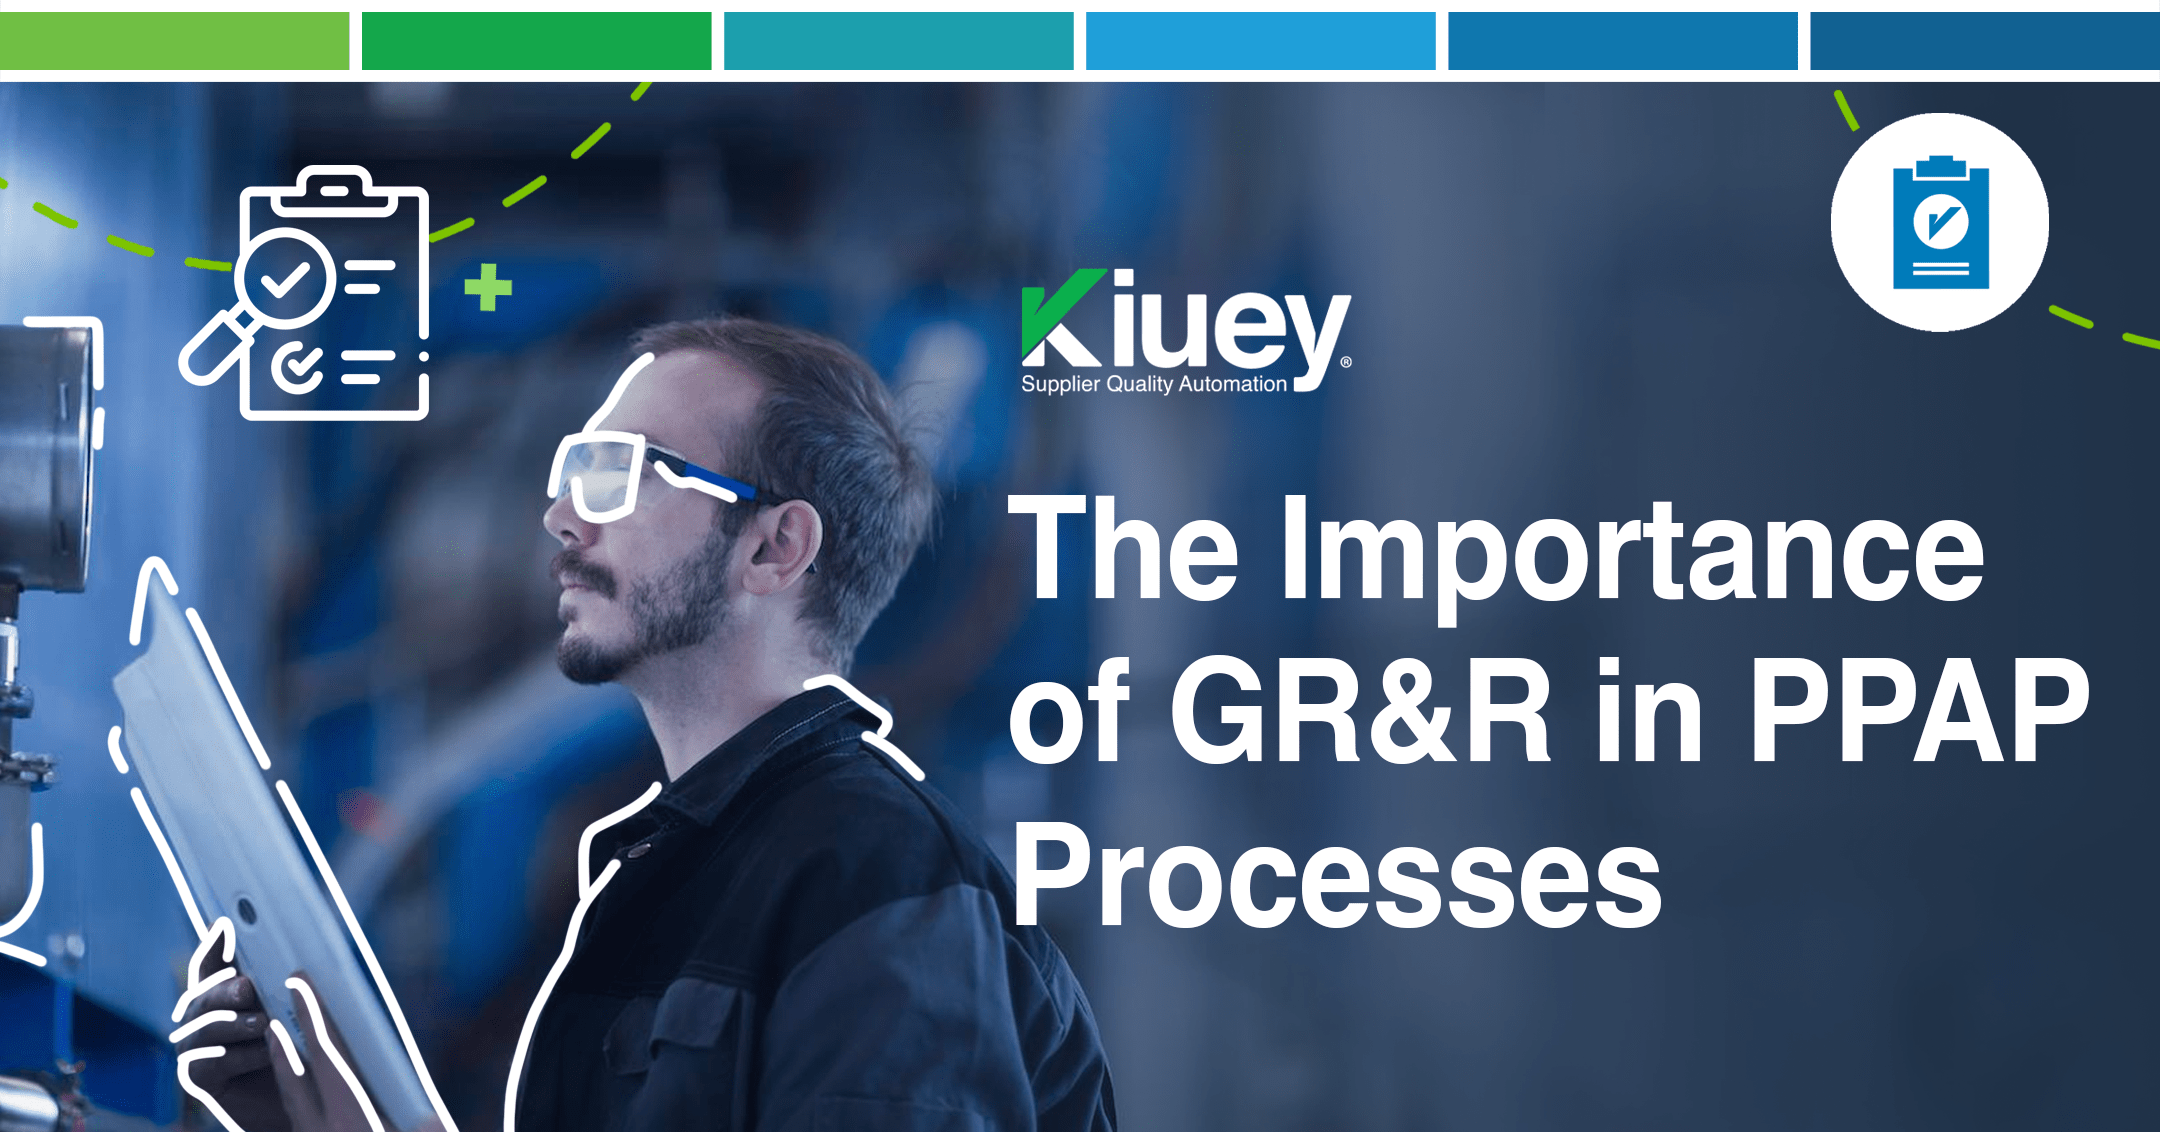 The Importance of GR&R in PPAP Processes